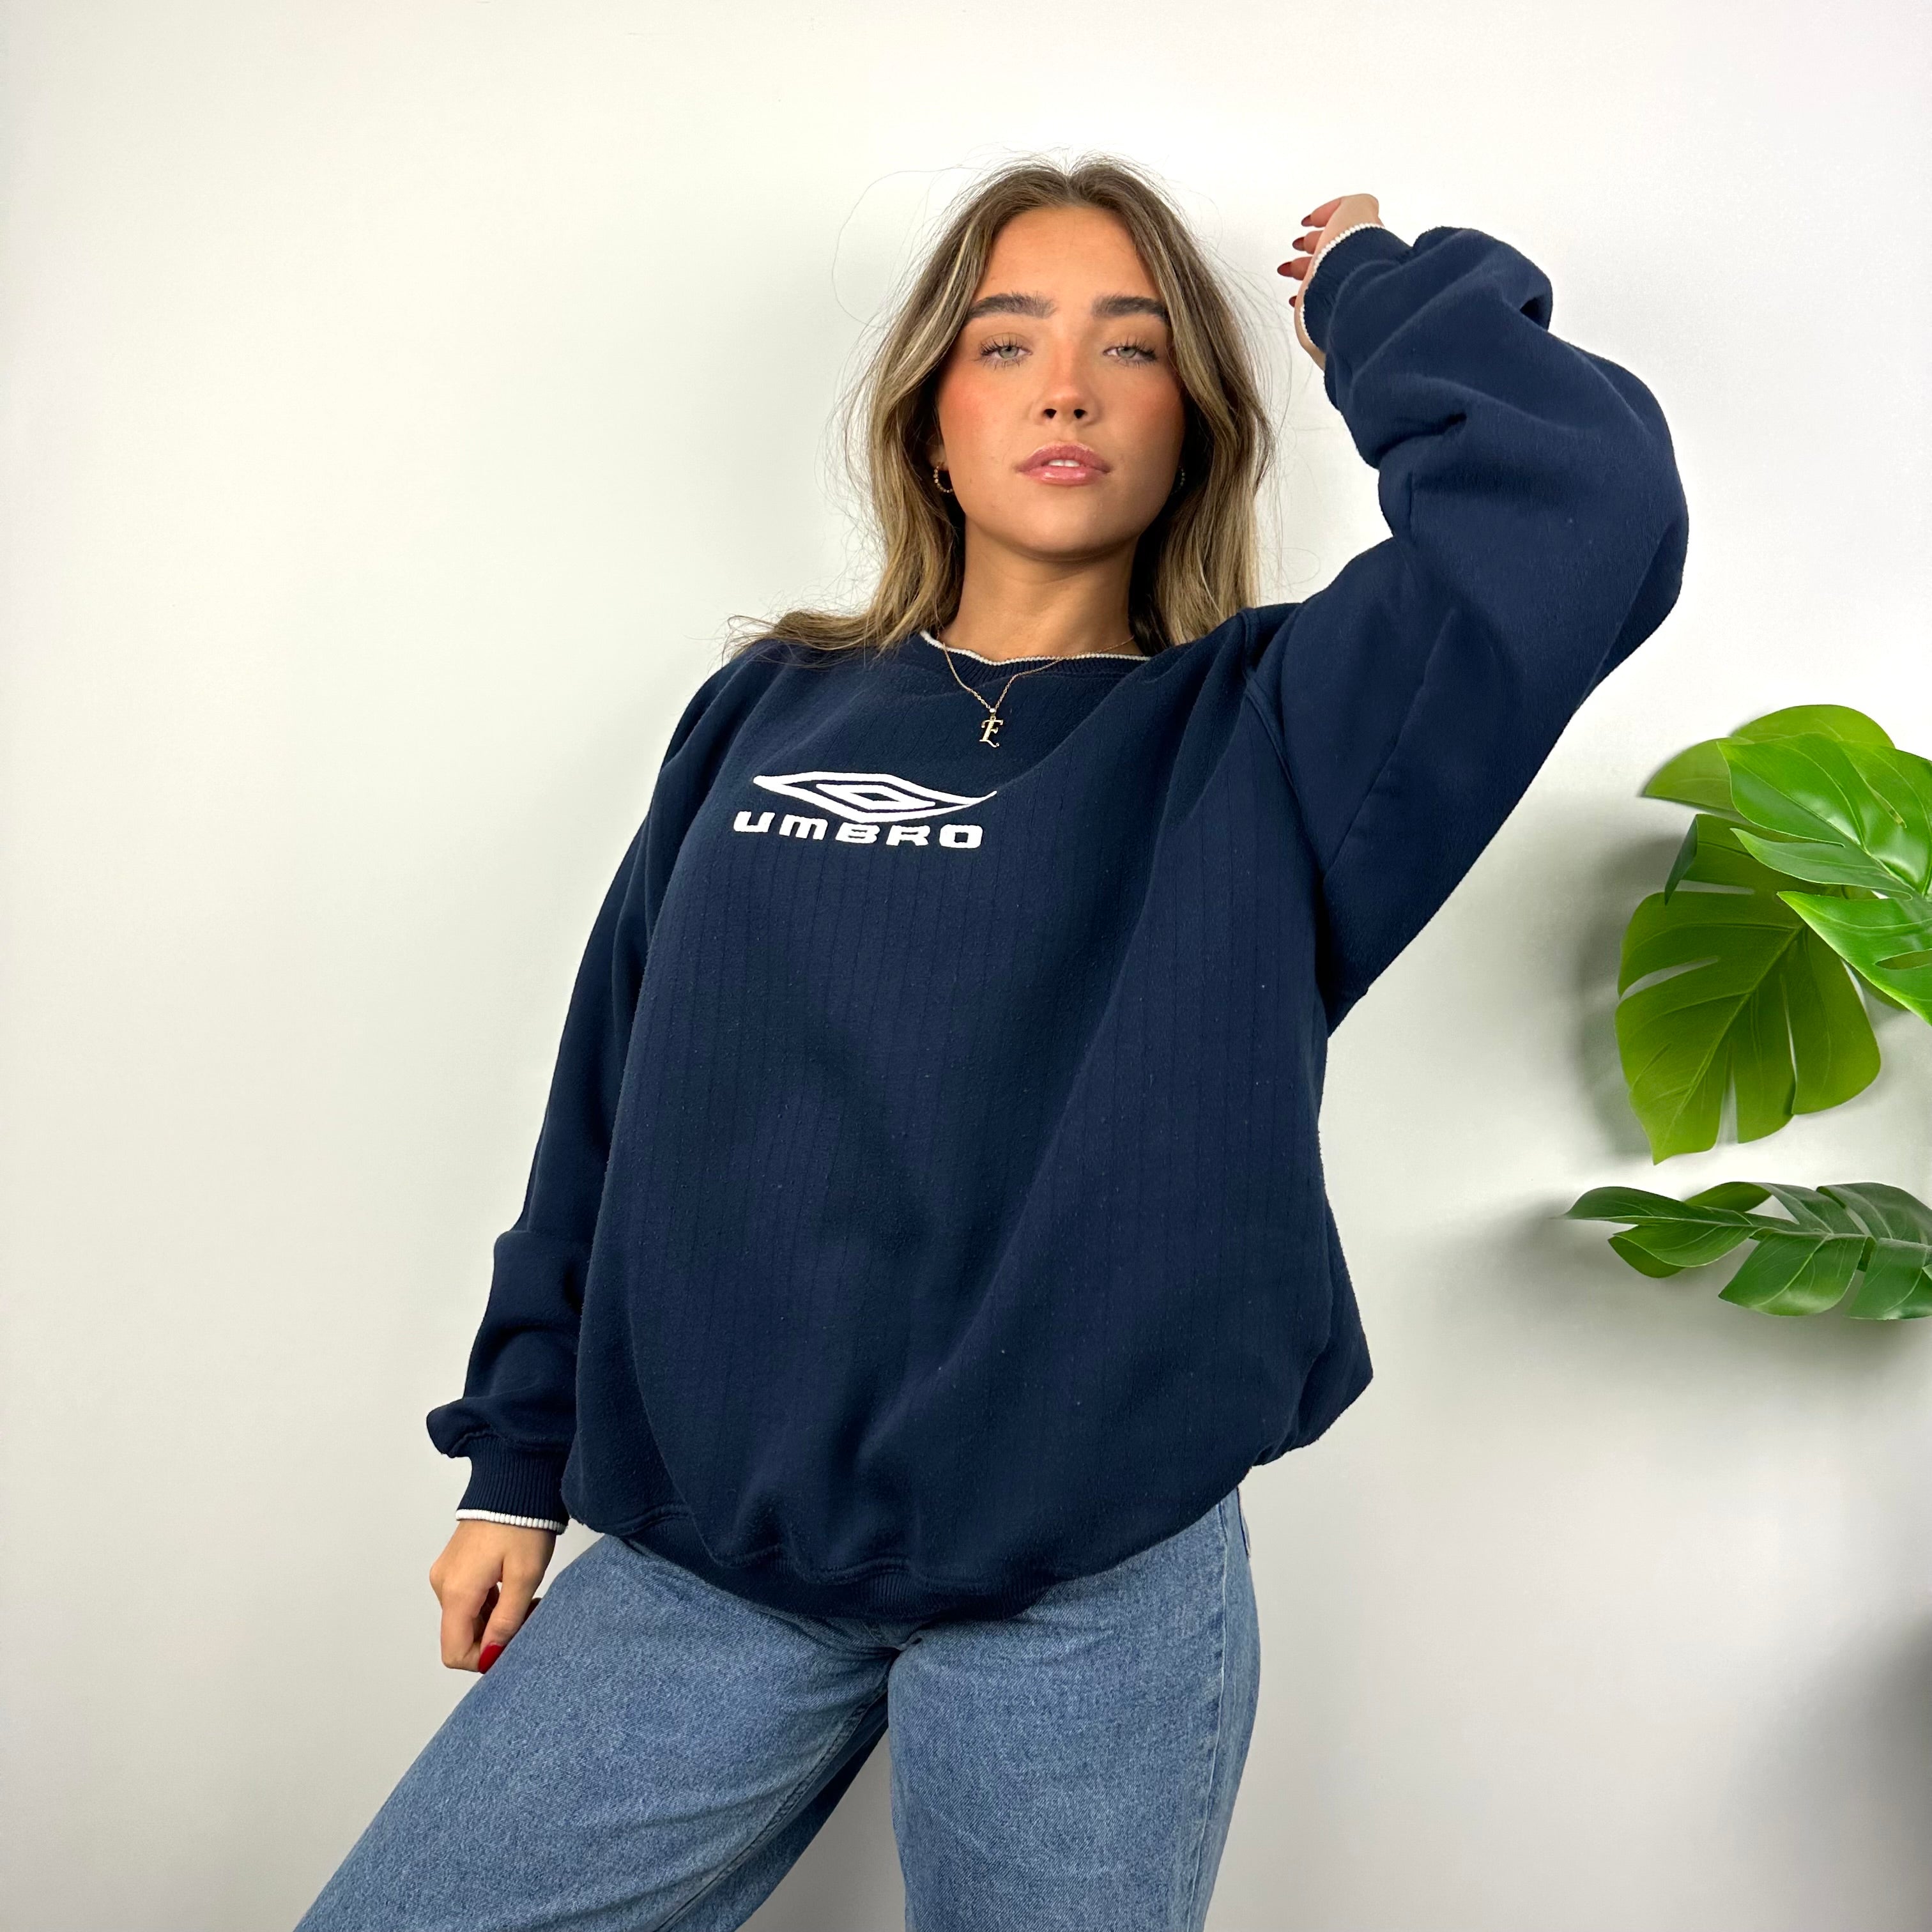 Umbro Navy Embroidered Spell Out Sweatshirt (XL)